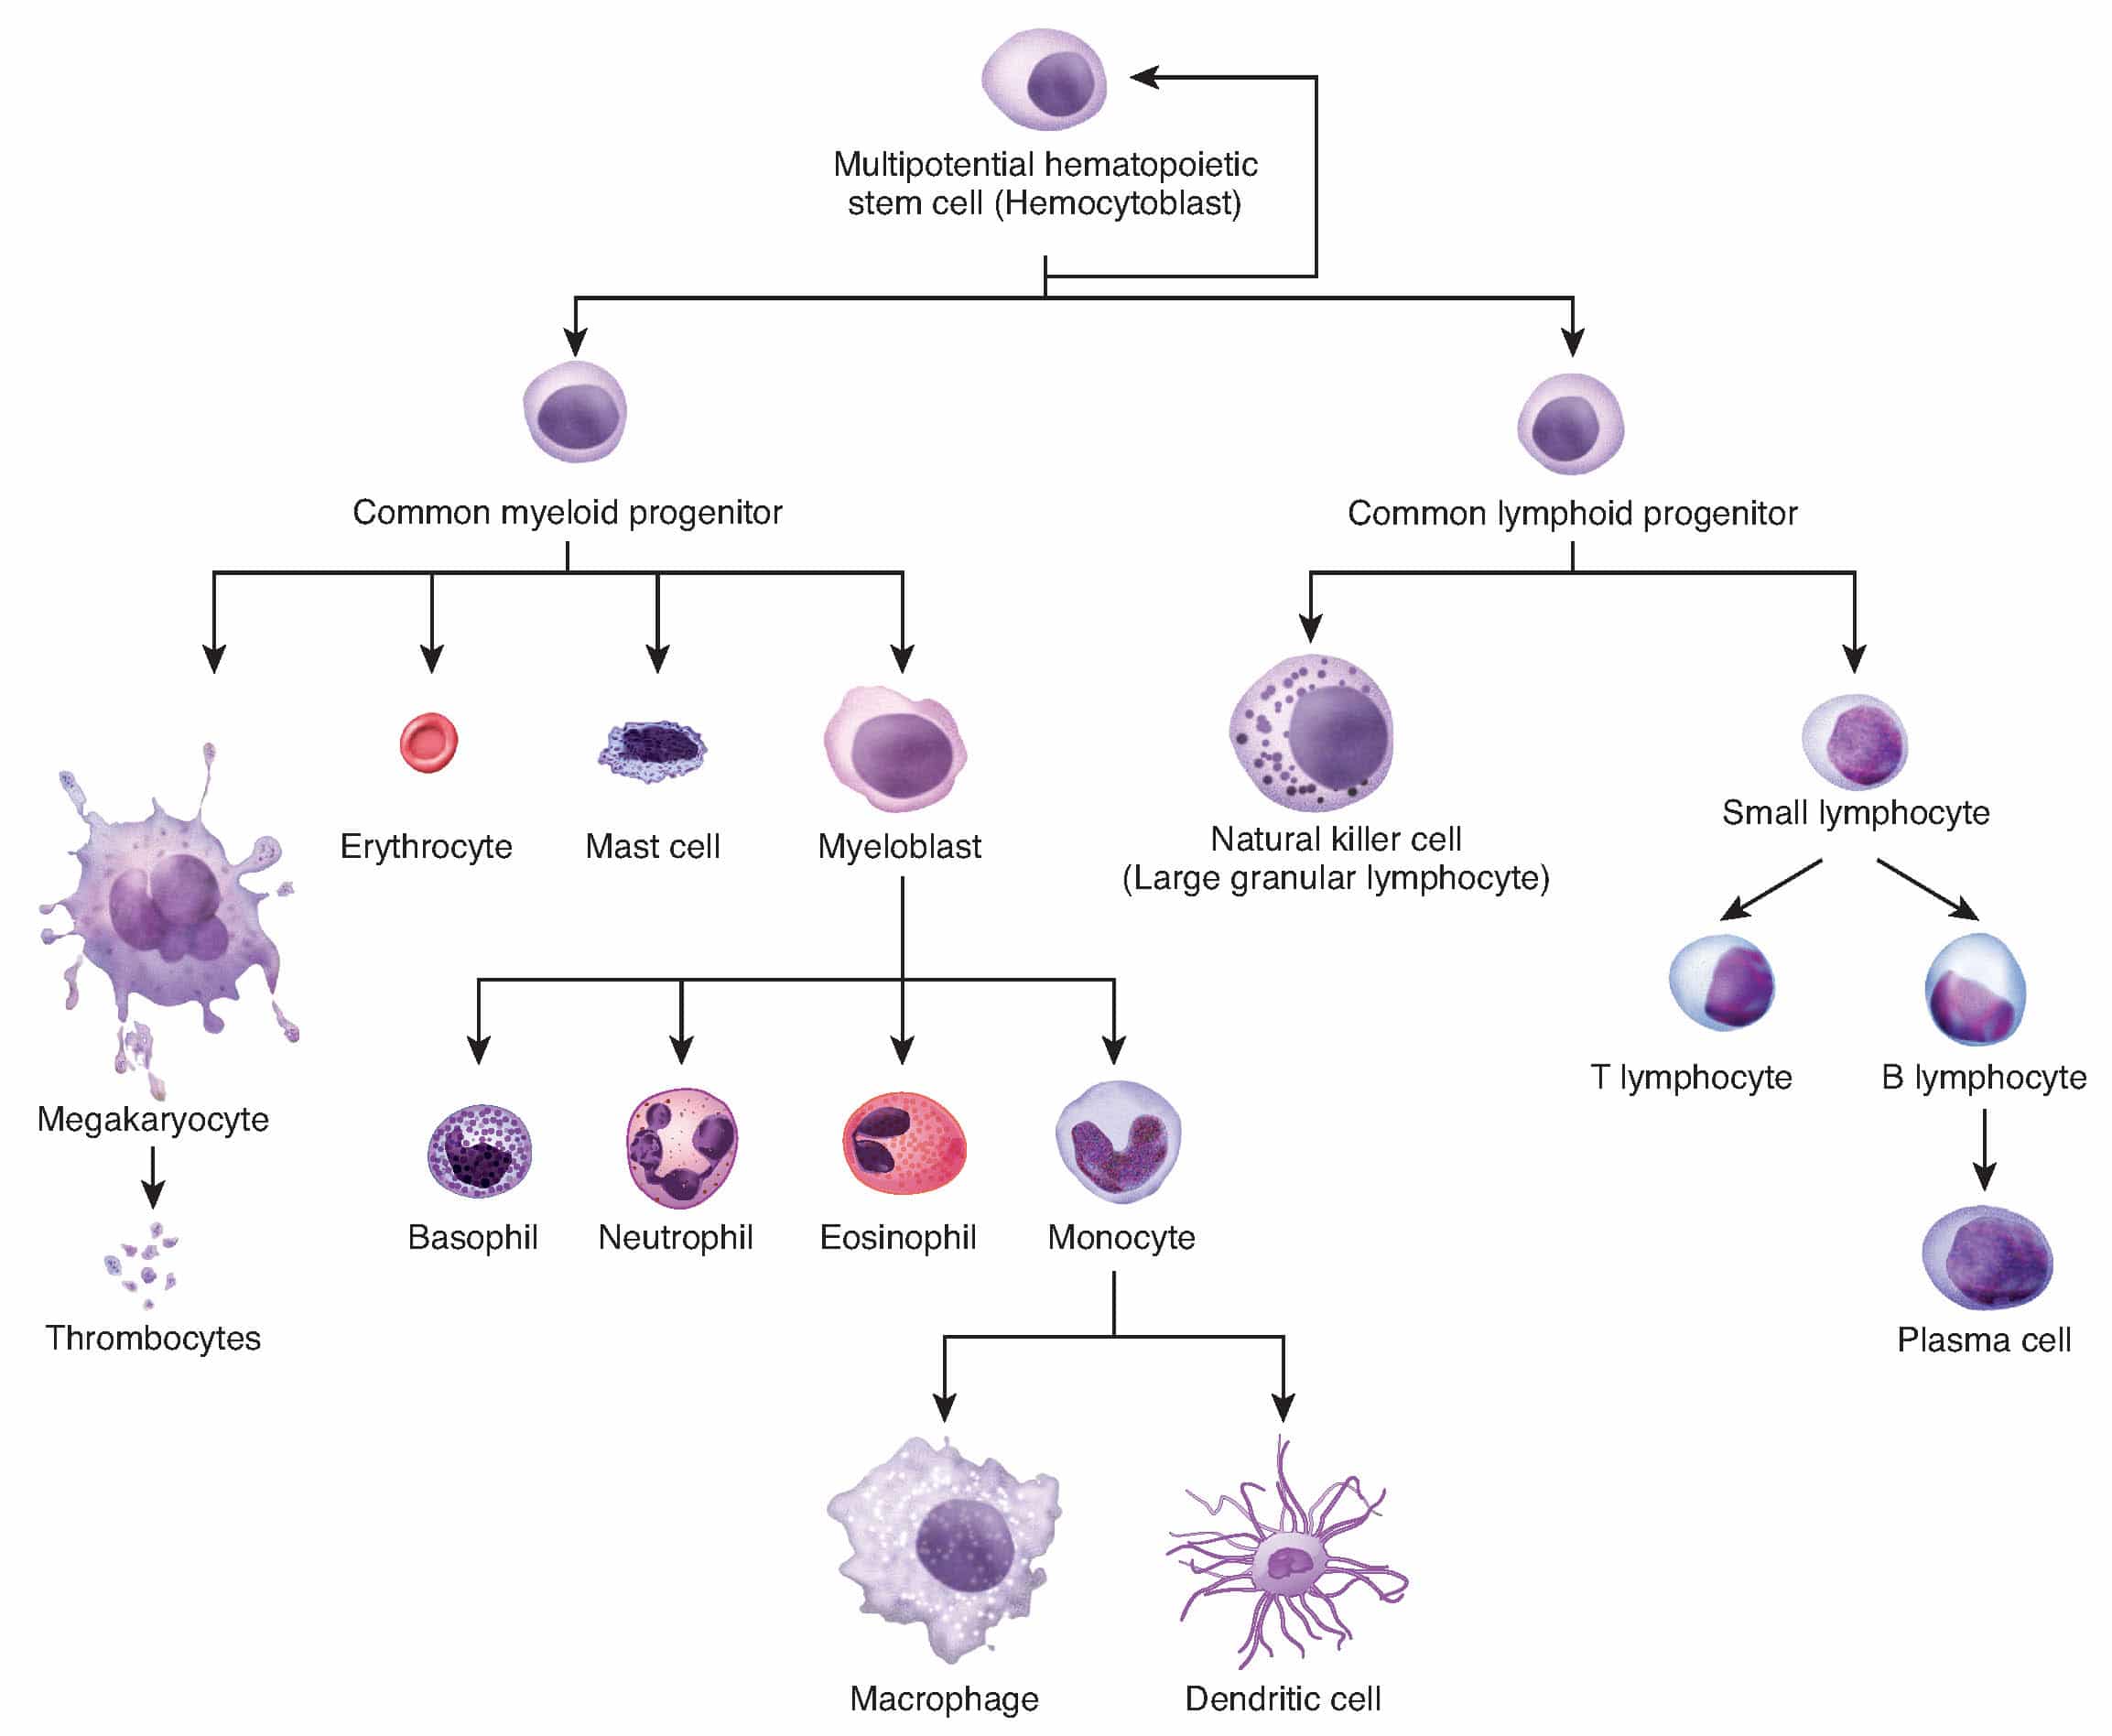 Image to show pathways of lymphoid and myeloid stem cells. Myeloid stem cells are affected in acute myeloid leukaemia.